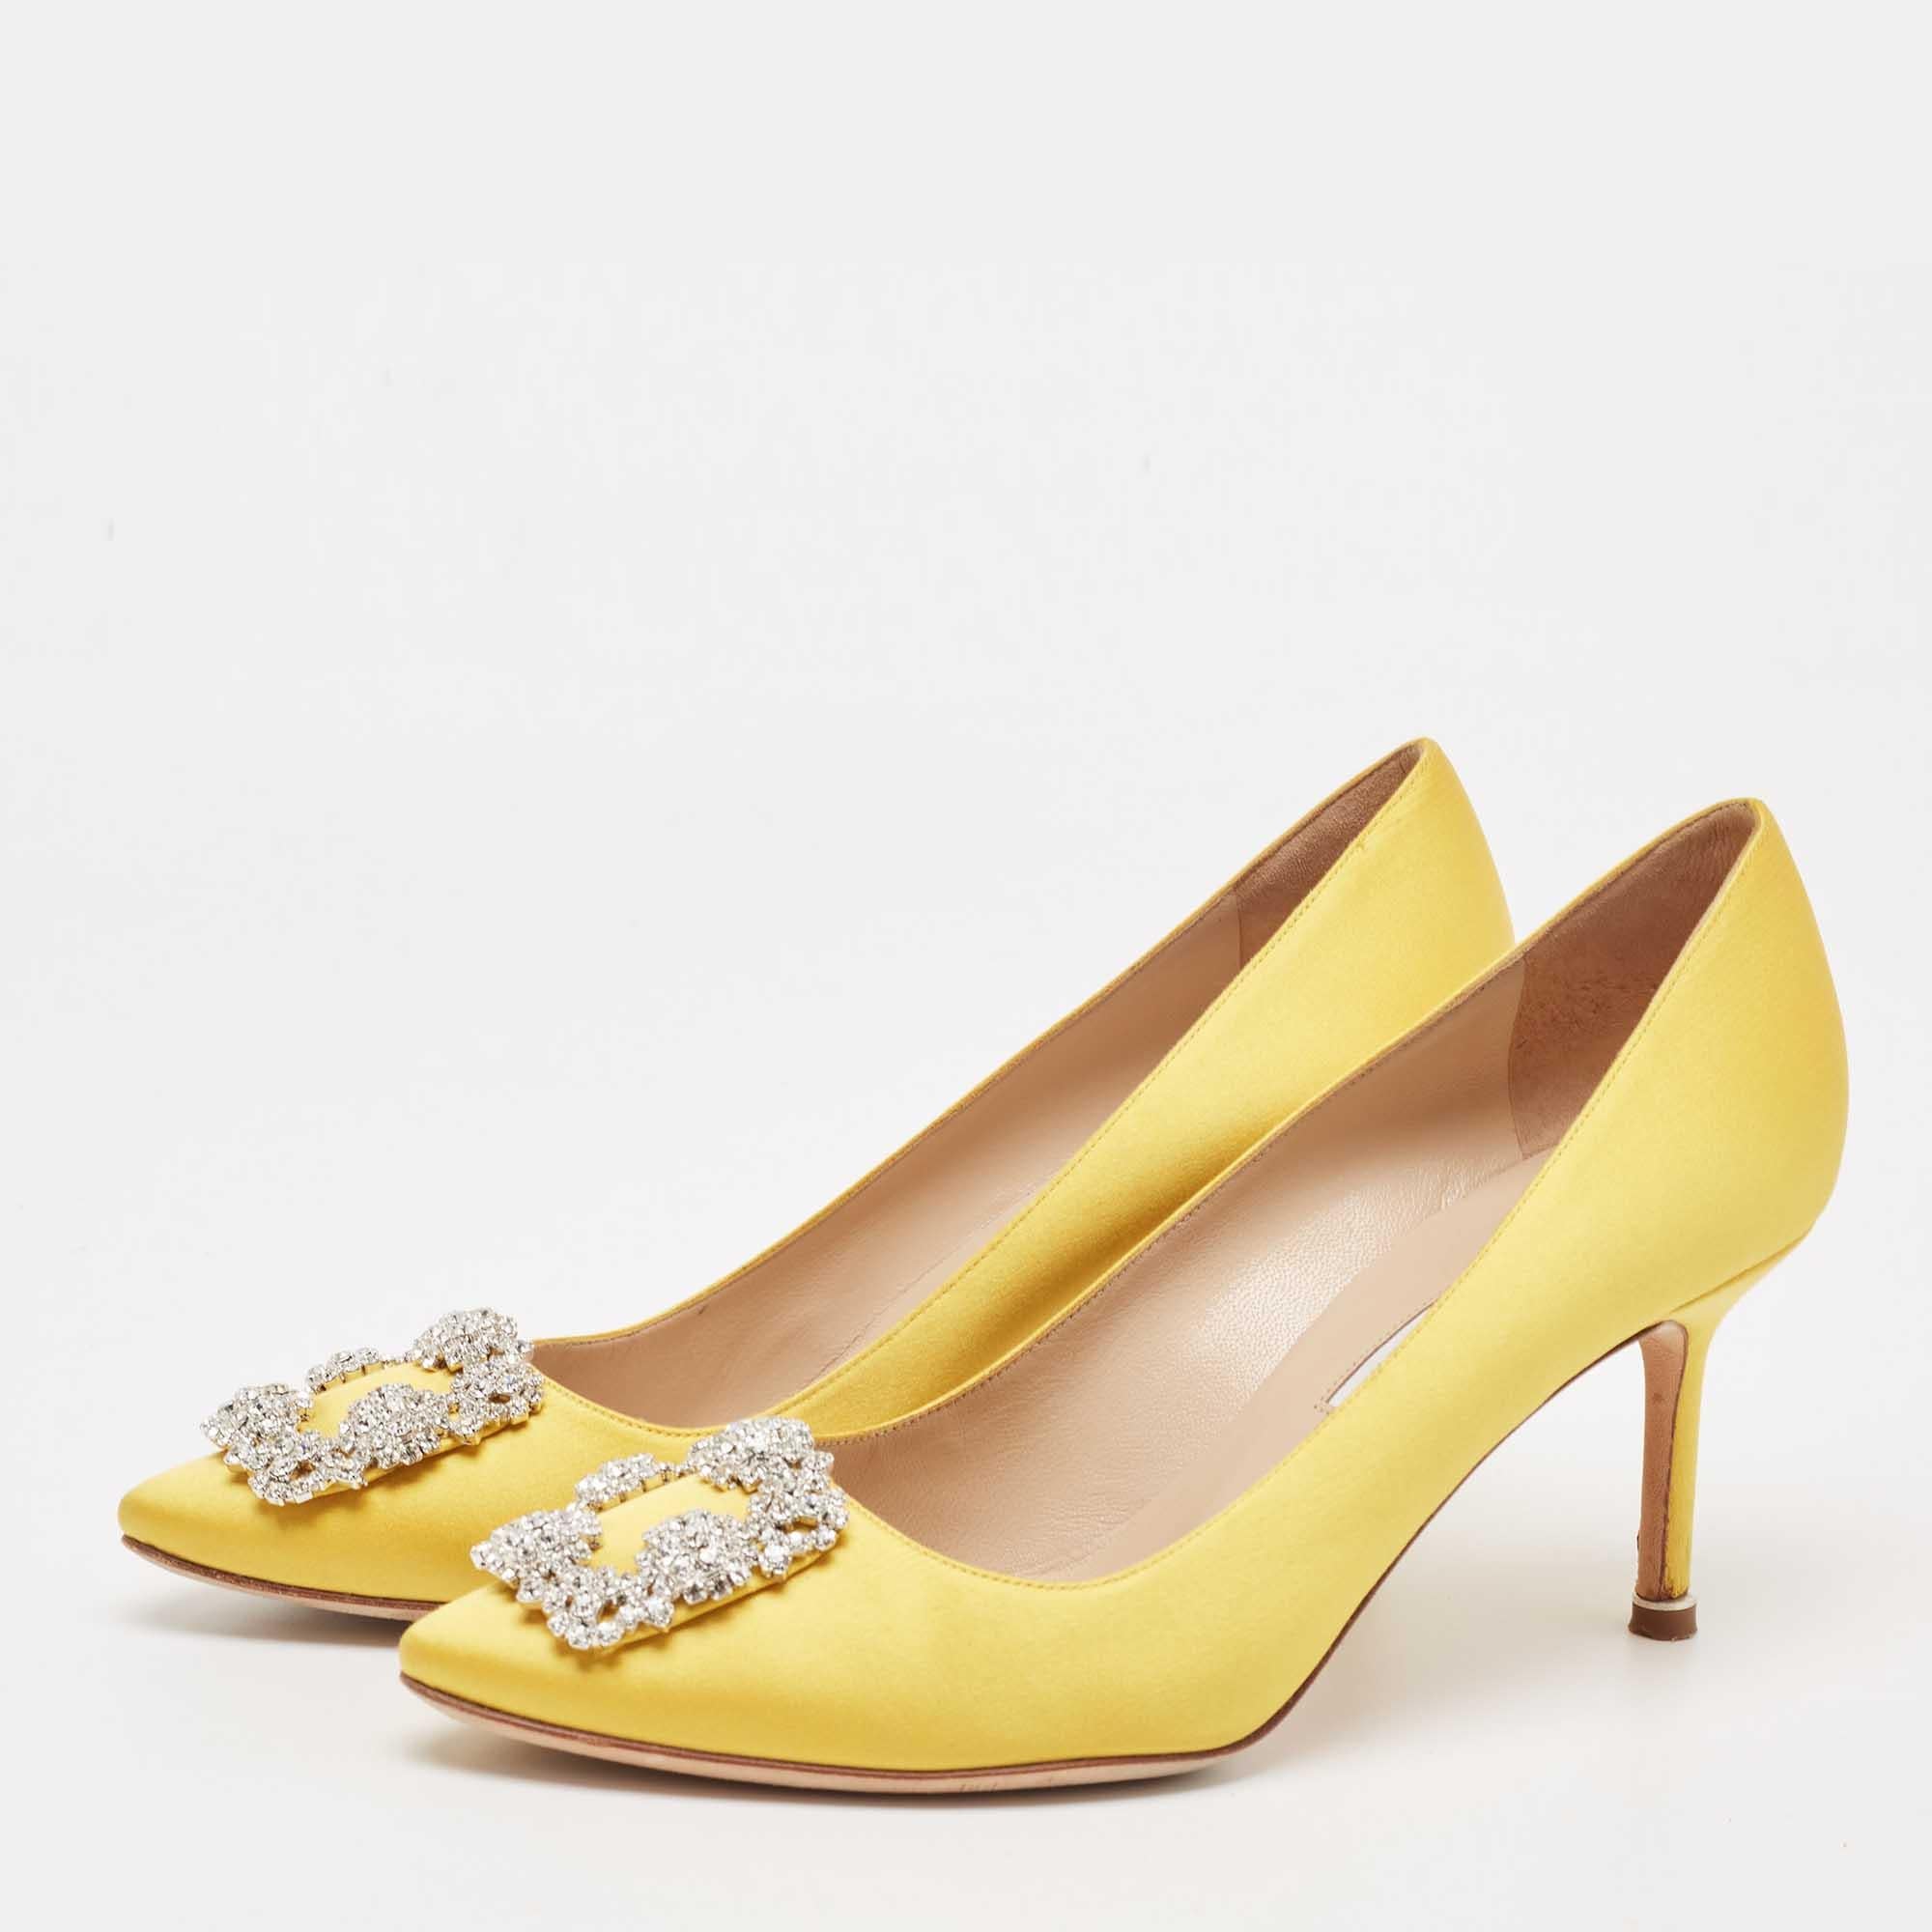 The 8cm heels of this pair of Manolo Blahnik pumps will reflect grace and luxury in every step. Made from satin, it is made striking with a crystal-embellished buckle detailing on the toes and exhibits branded insoles.

Includes: Original Dustbag,